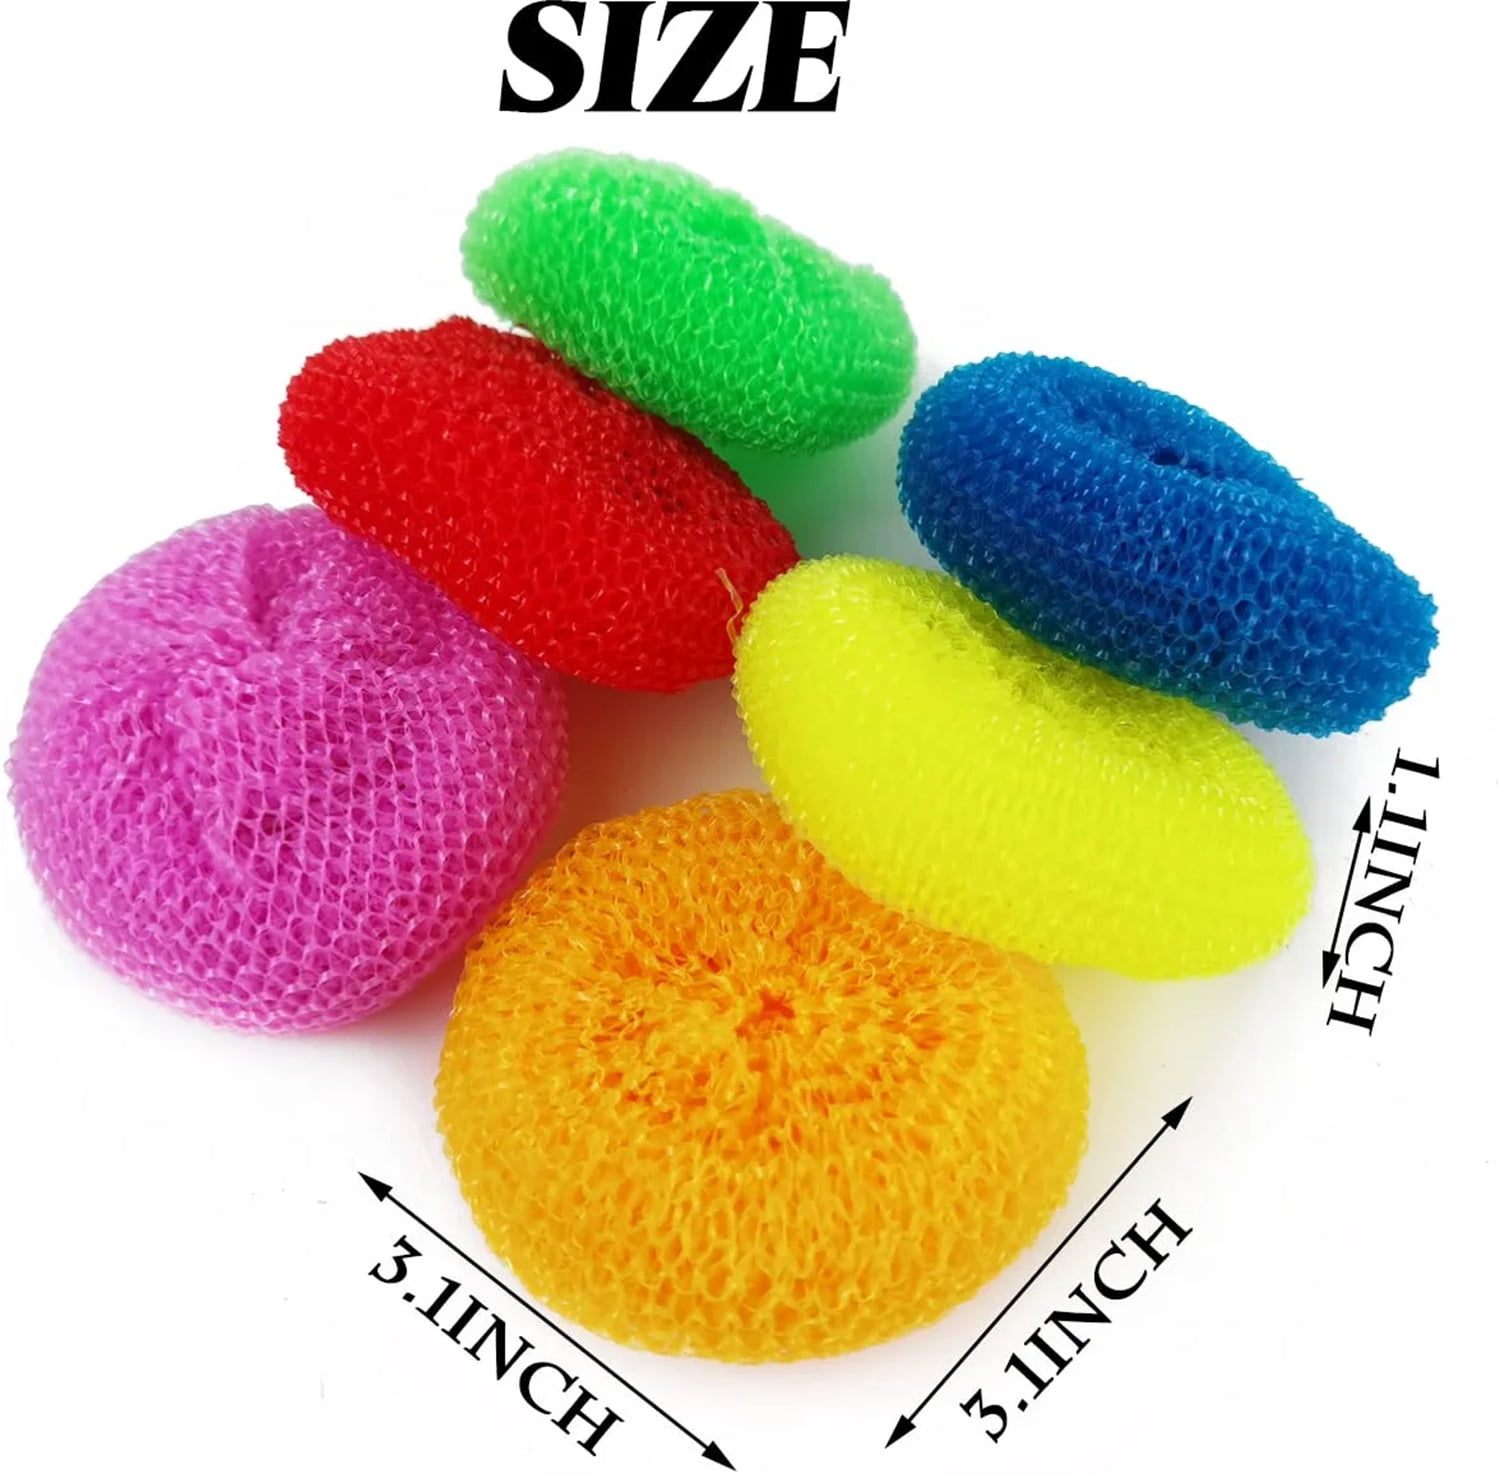 Round Nylon Plastic Scrubber, for Utensils and tiles pack of 12 piece free  ship